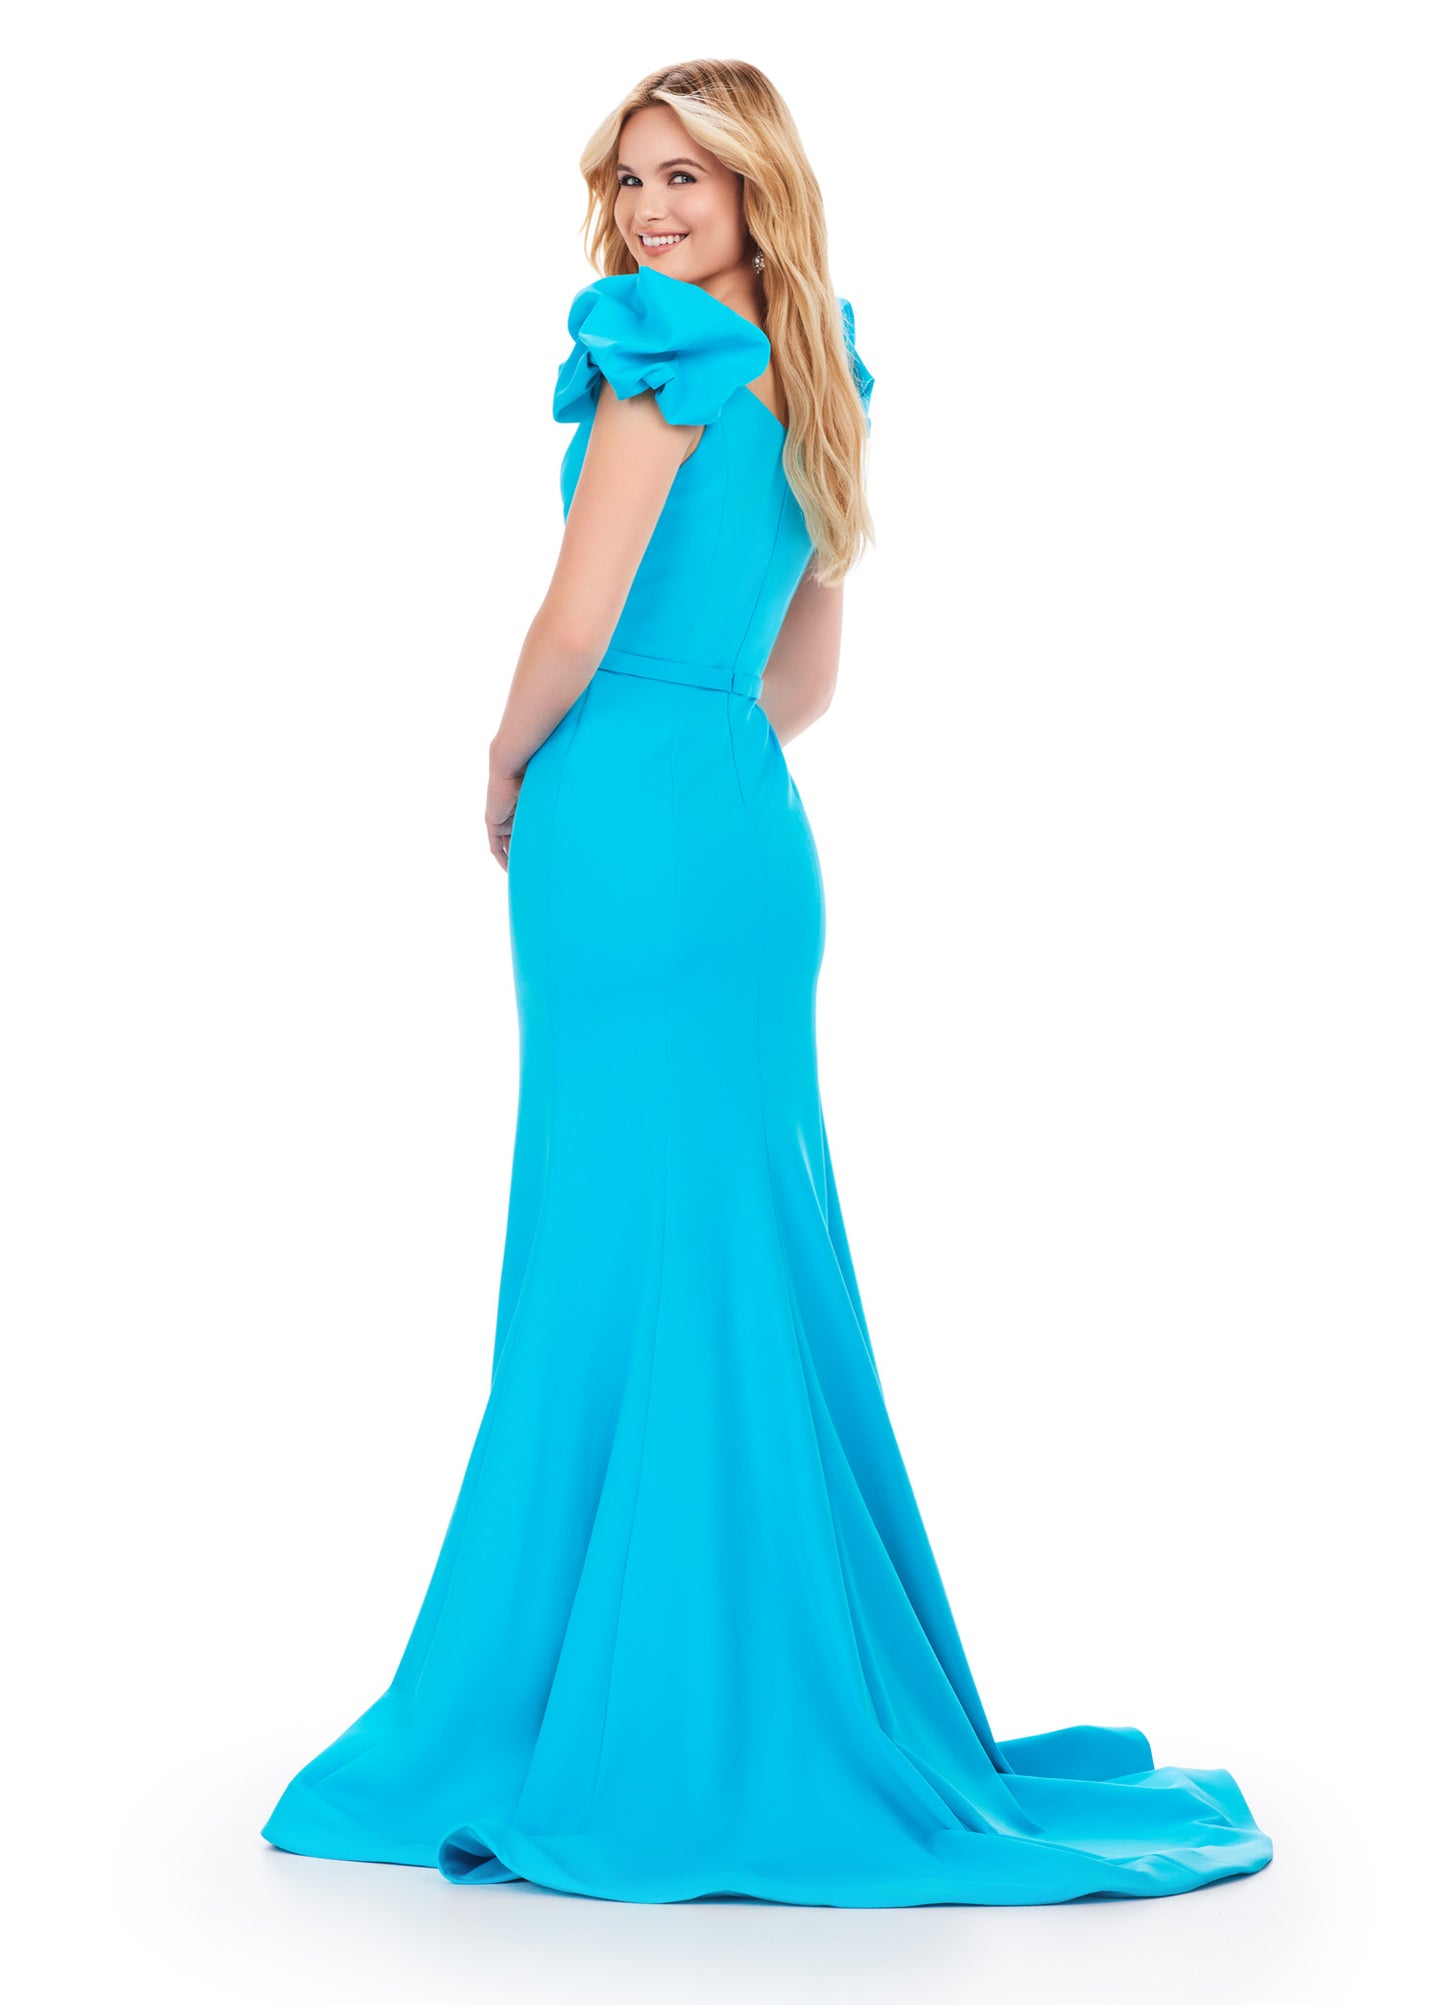 Ashley Lauren 11615 Long Prom Dress A-Line Scuba Gown Beaded Belt Puff Sleeves V Neck Formal Pageant Gown